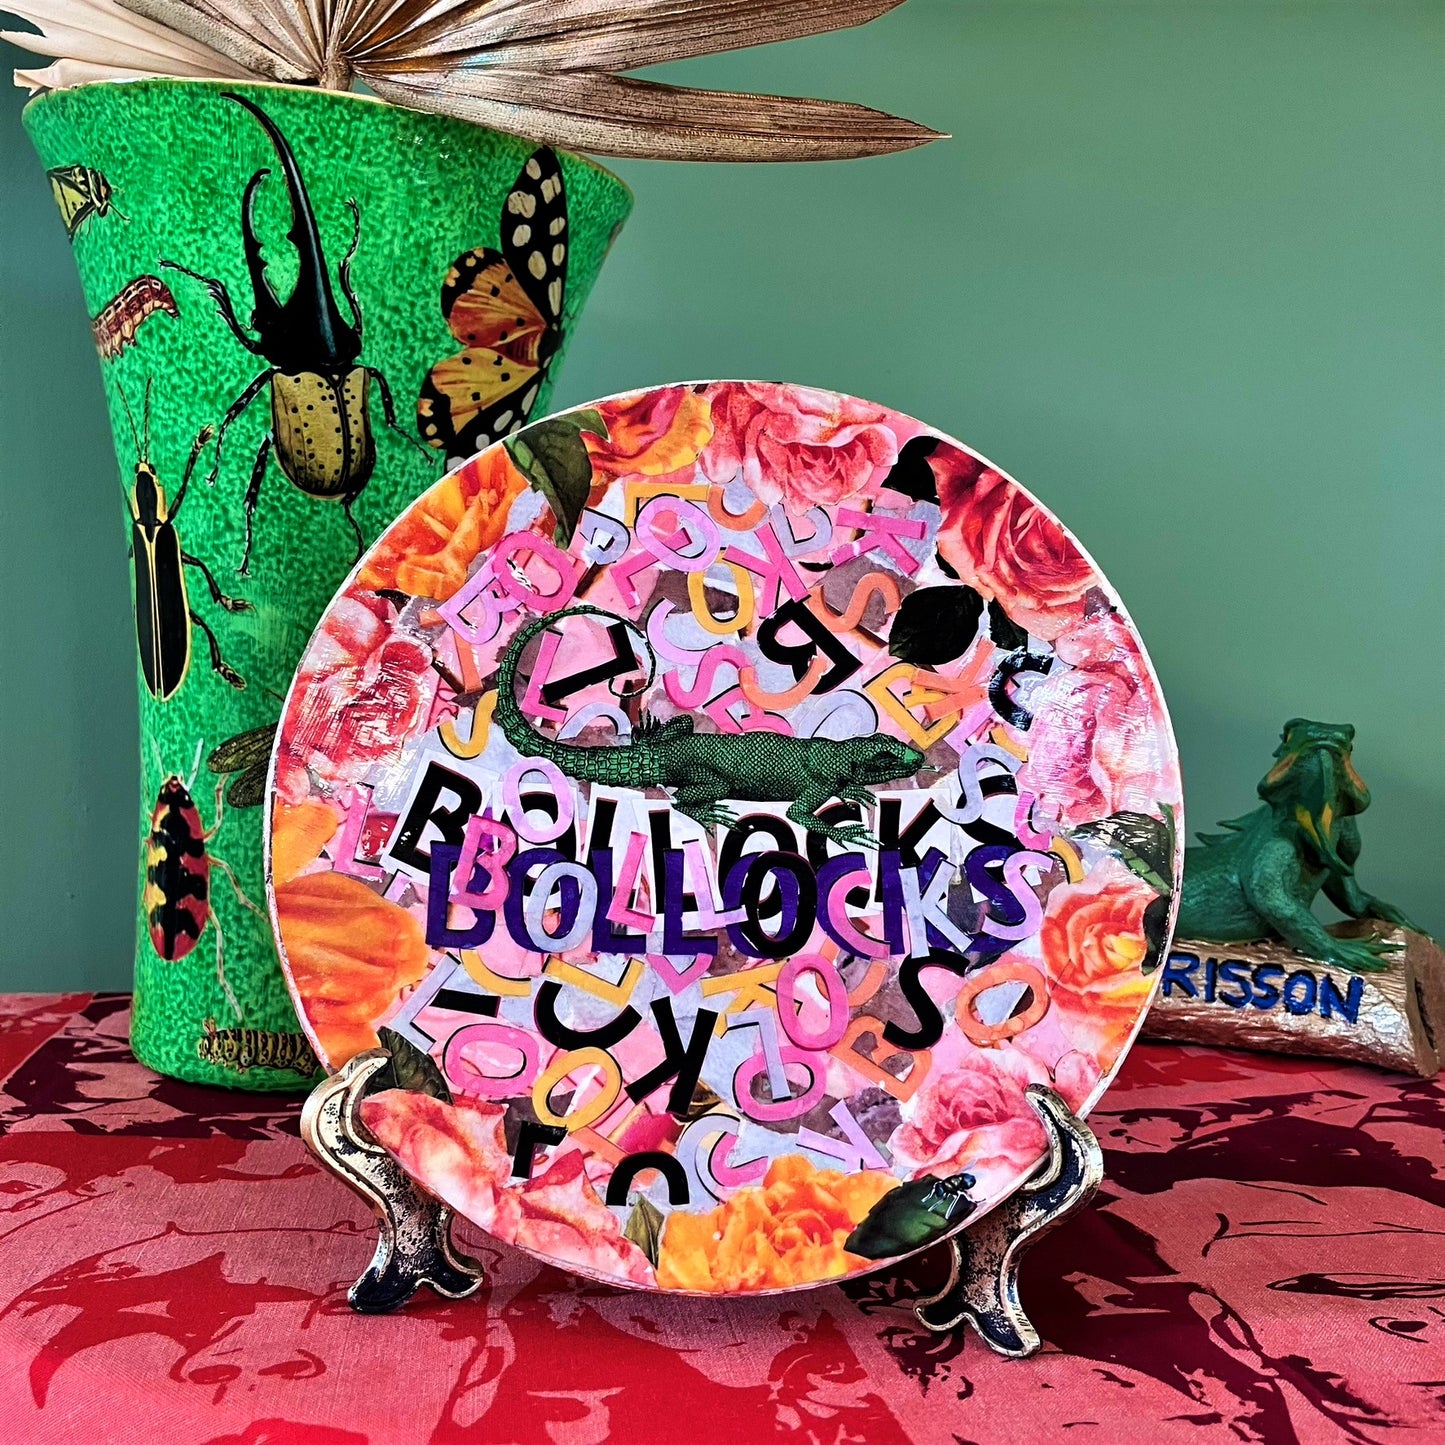 "Bollocks" Wall Plate by House of Frisson, featuring a collage of colourful letters forming the word "bollocks", and a lizard, framed by roses. Plate on a plate stand, resting on a table.